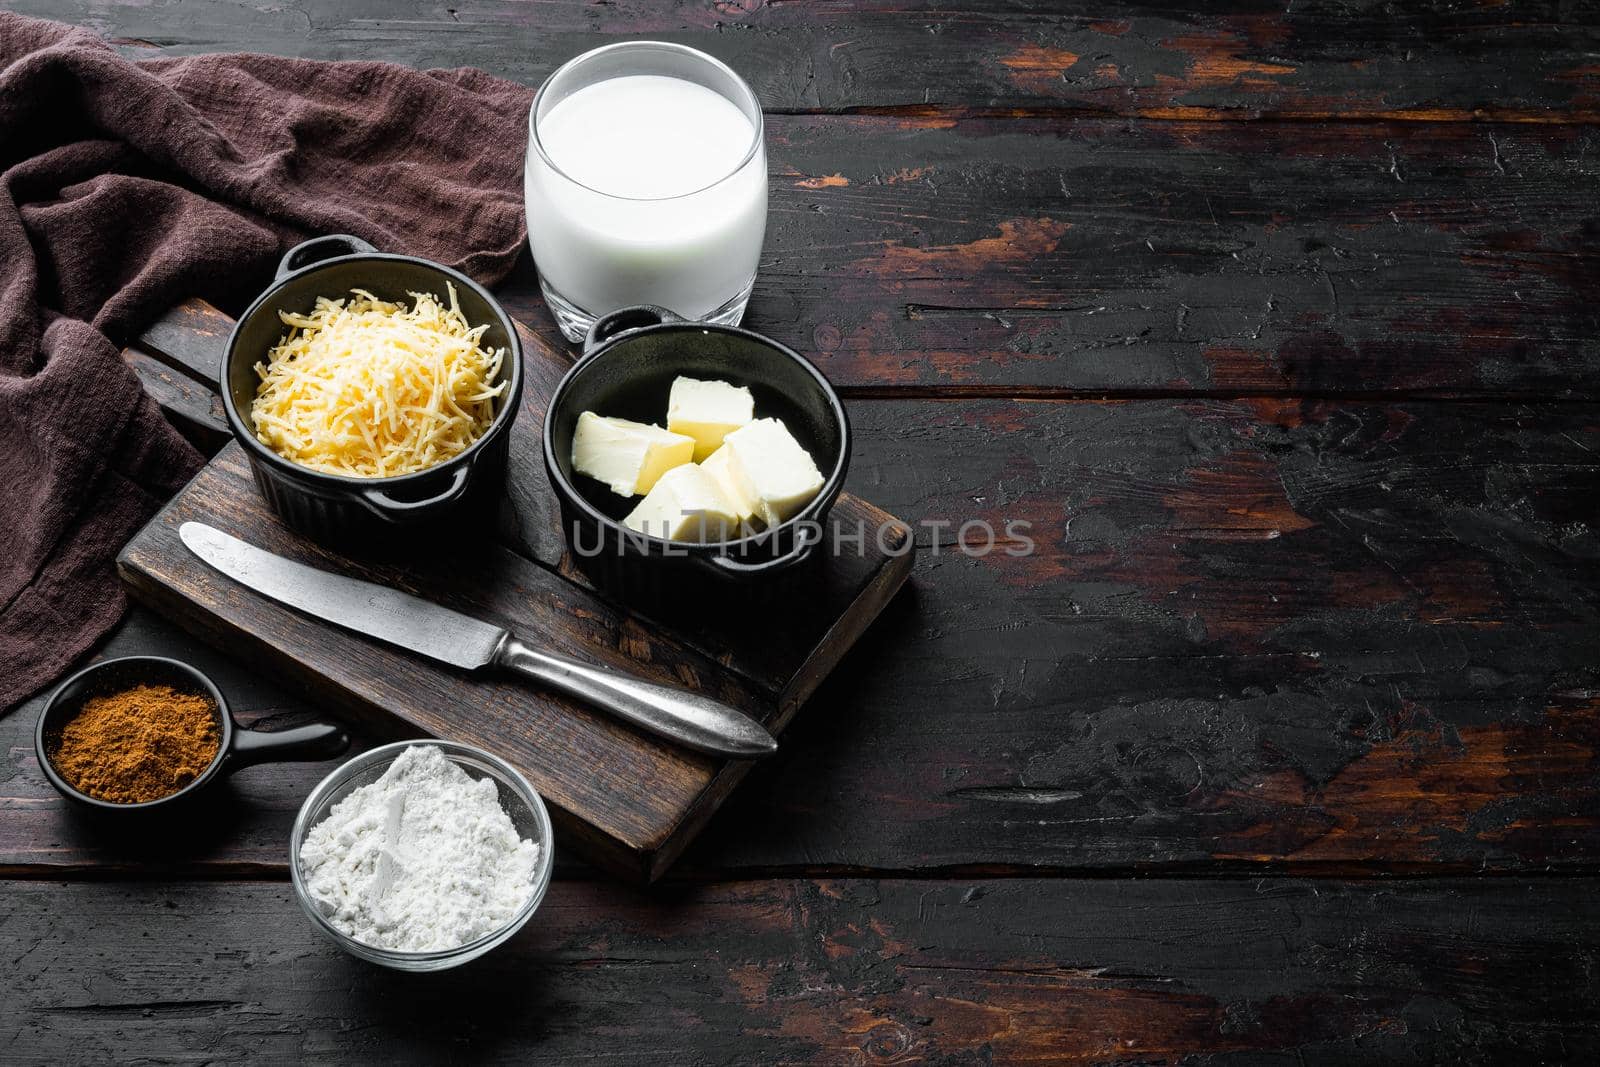 White Bechamel sauce ingredients set, on old dark wooden table background, with copy space for text